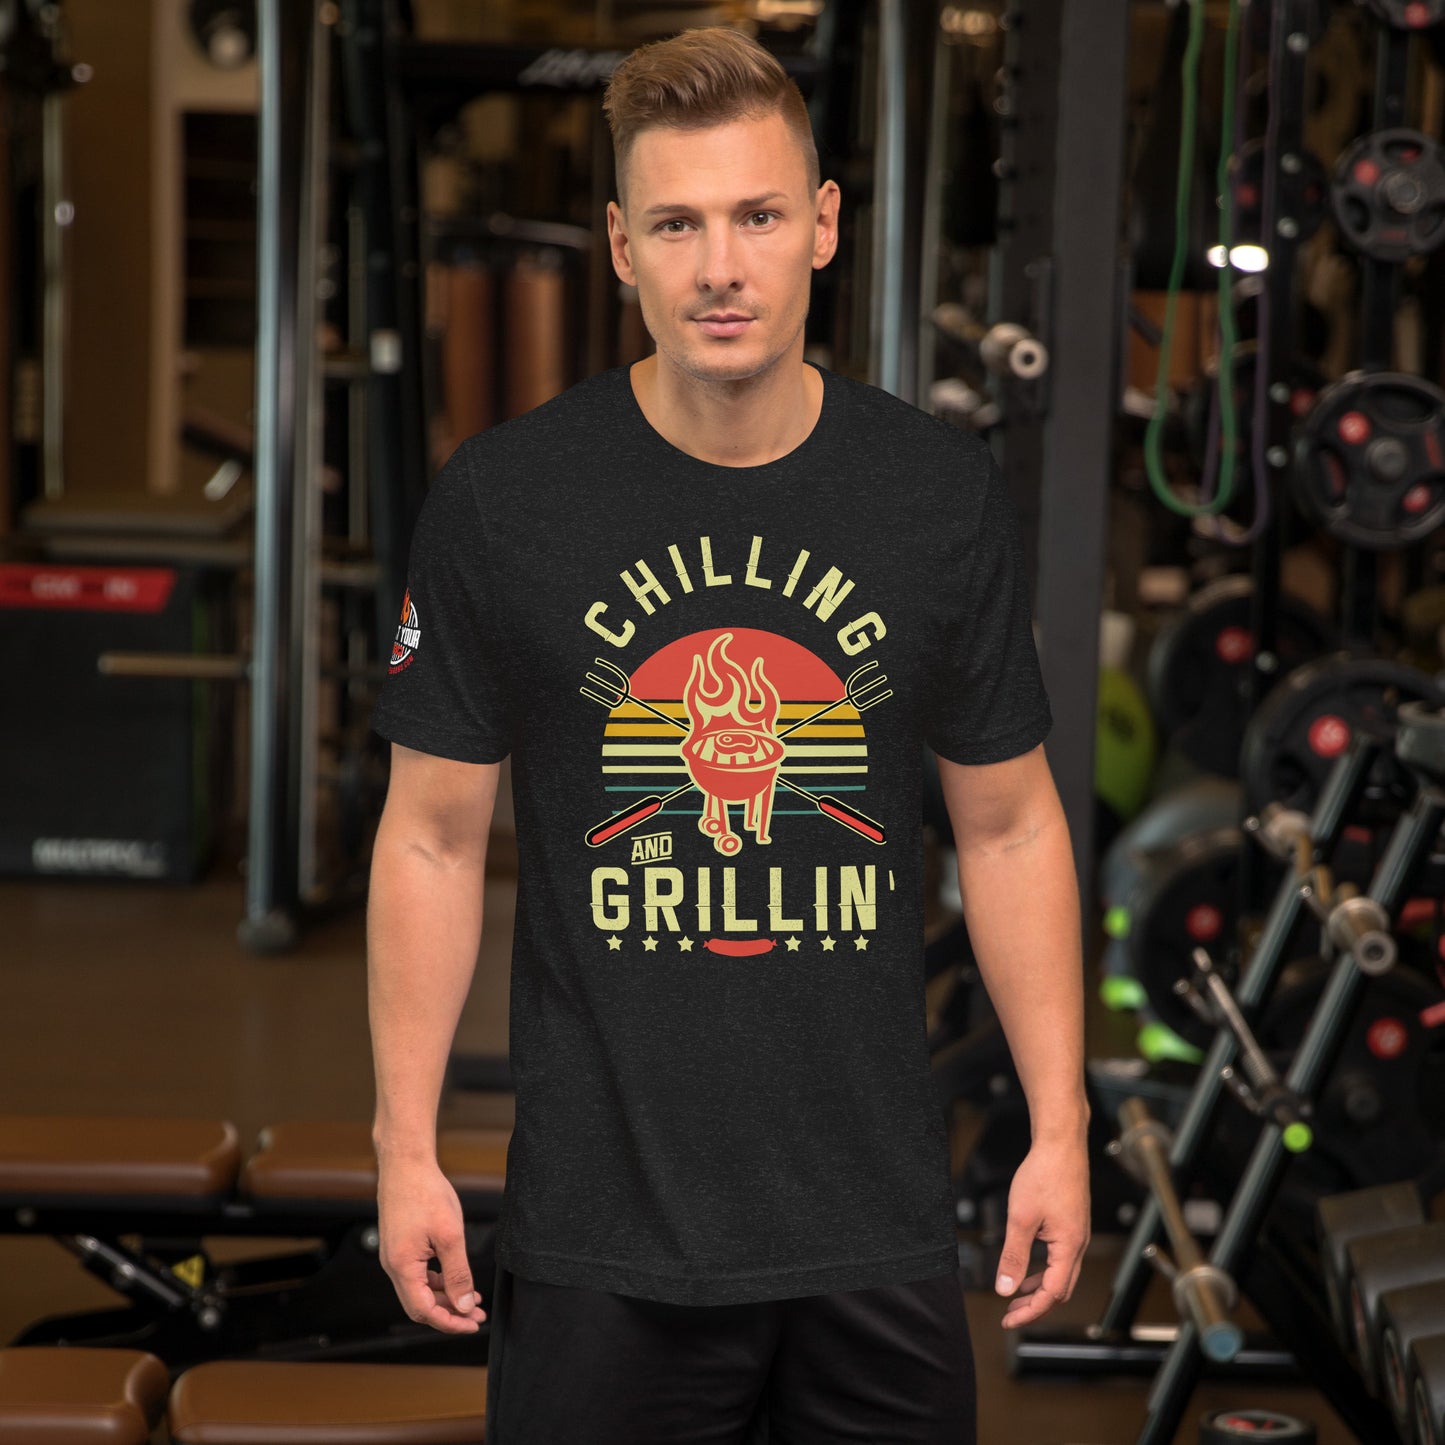 Chilling & Grillin' T-shirt